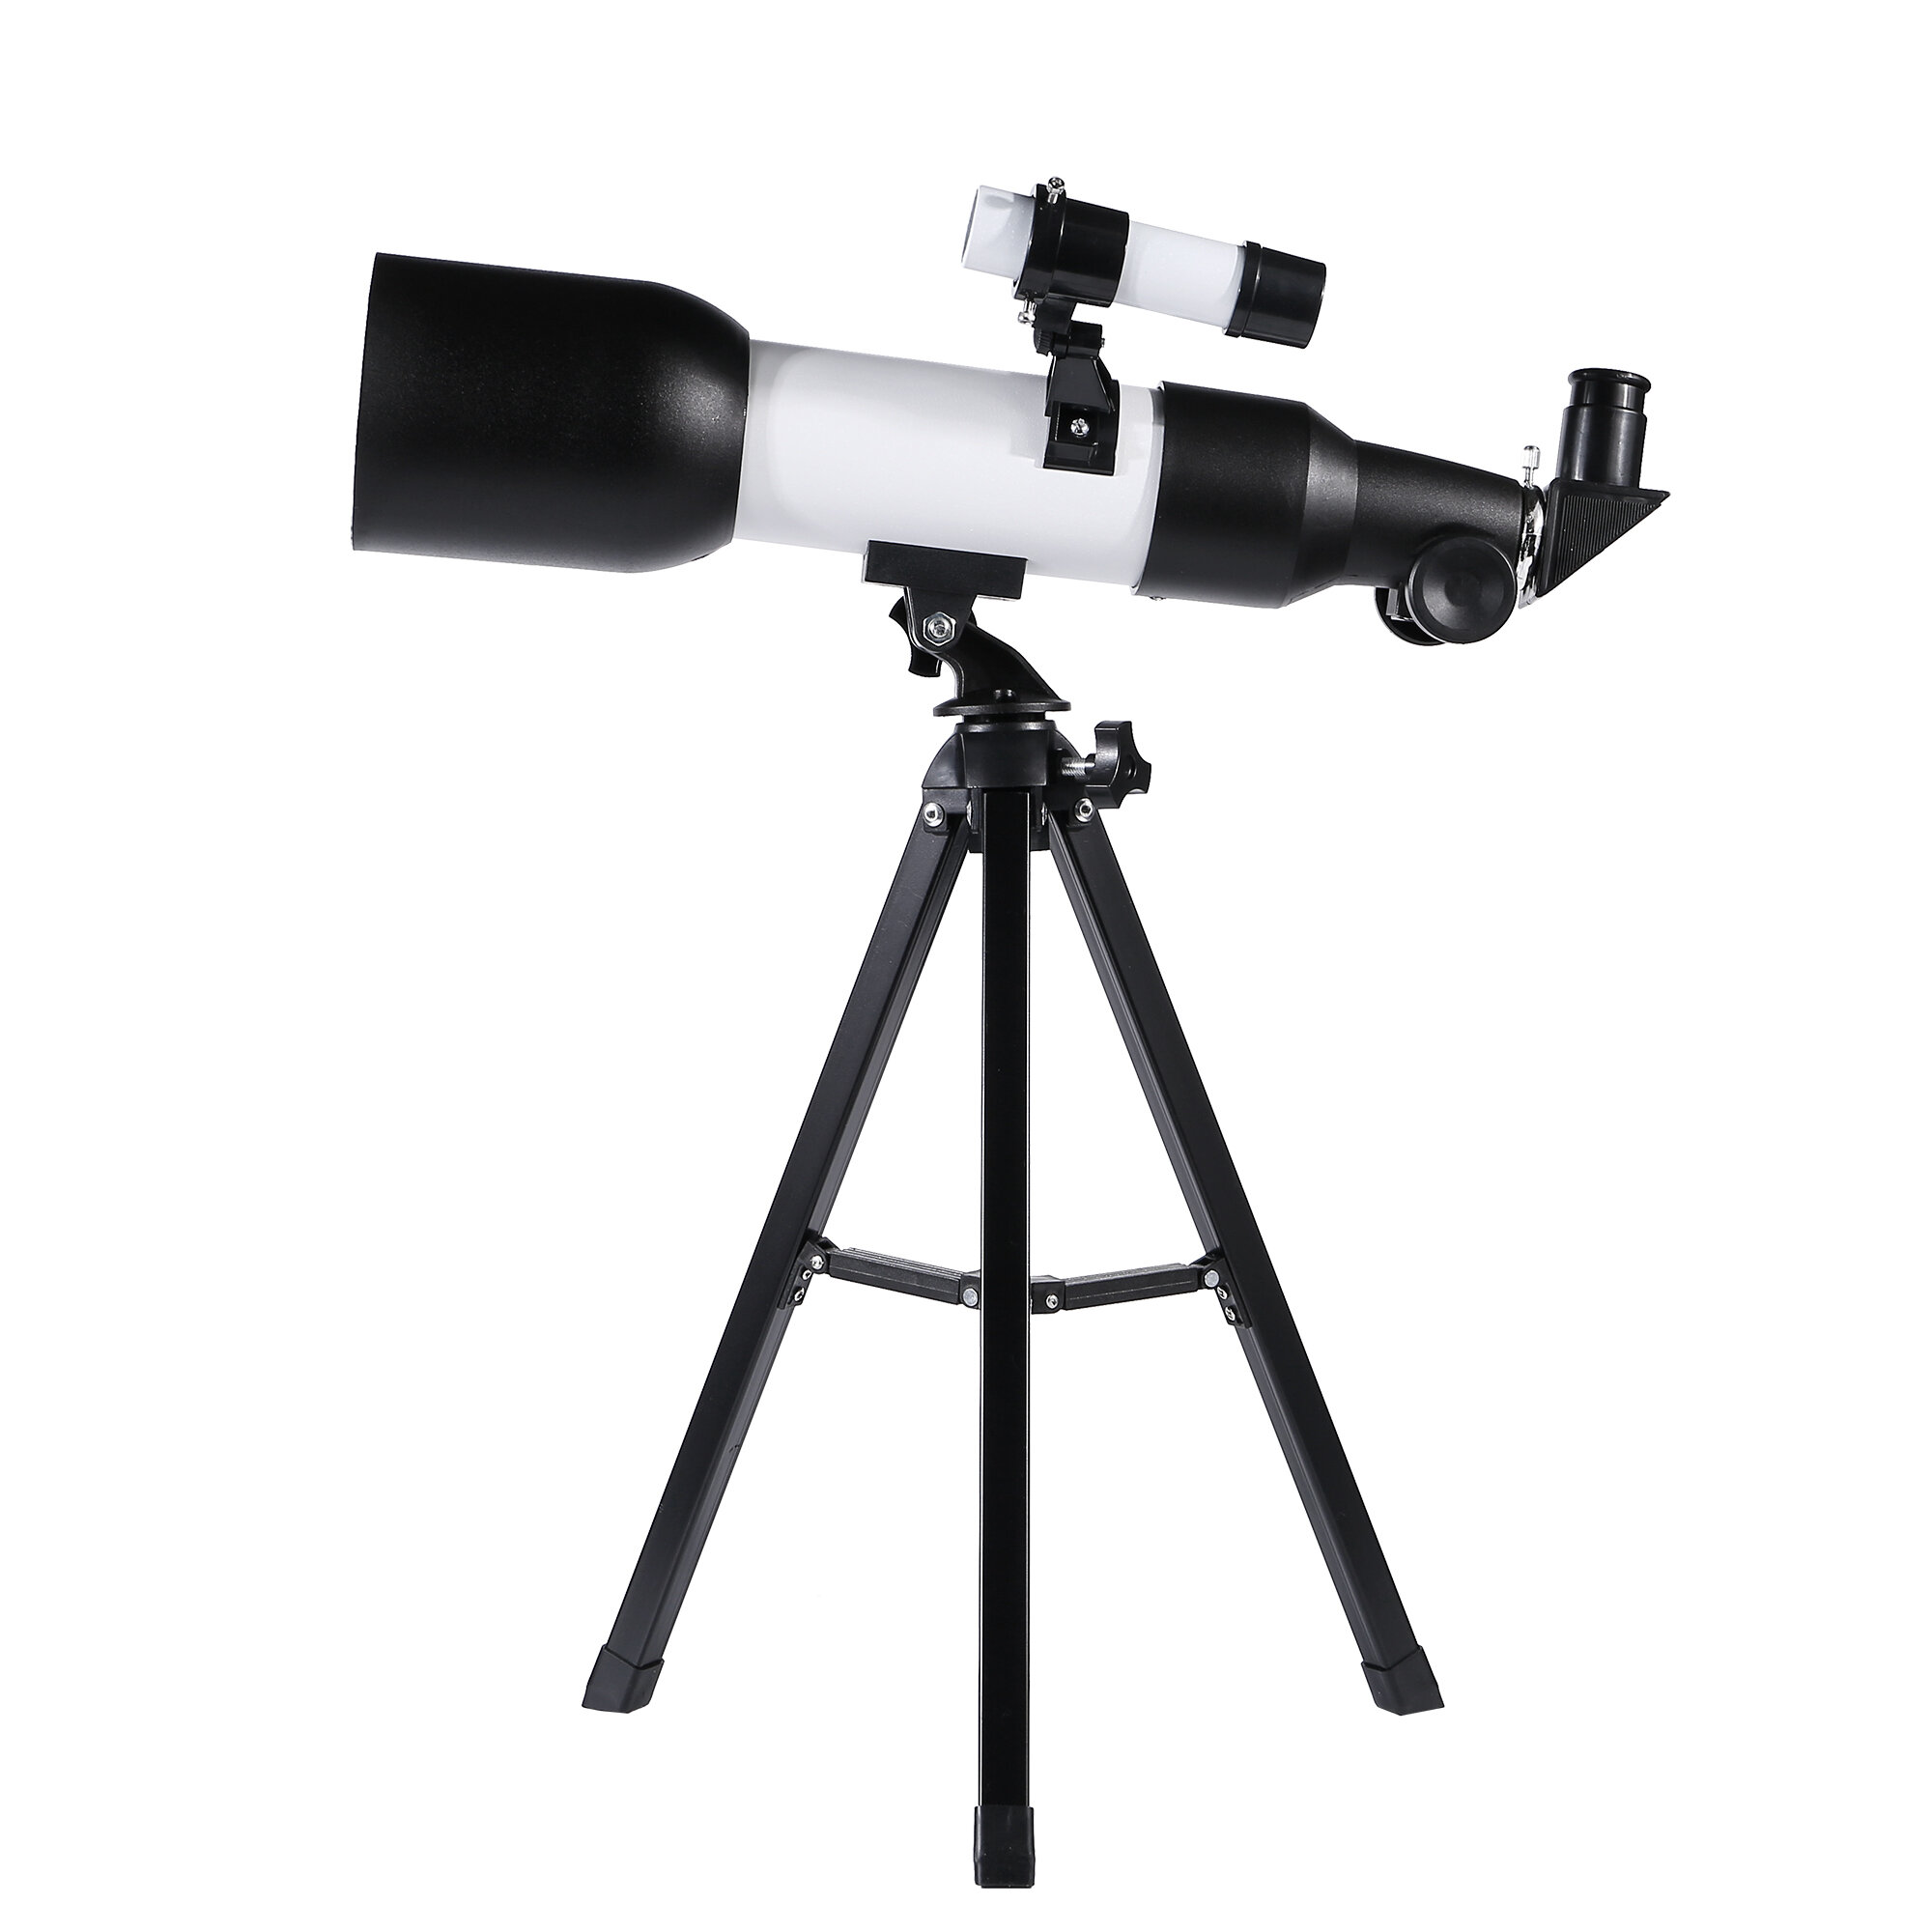 Eyebre 120x Professional HD Astronomical Telescope Children Low Light Night Vision Deep Space Stargazing with Tripod